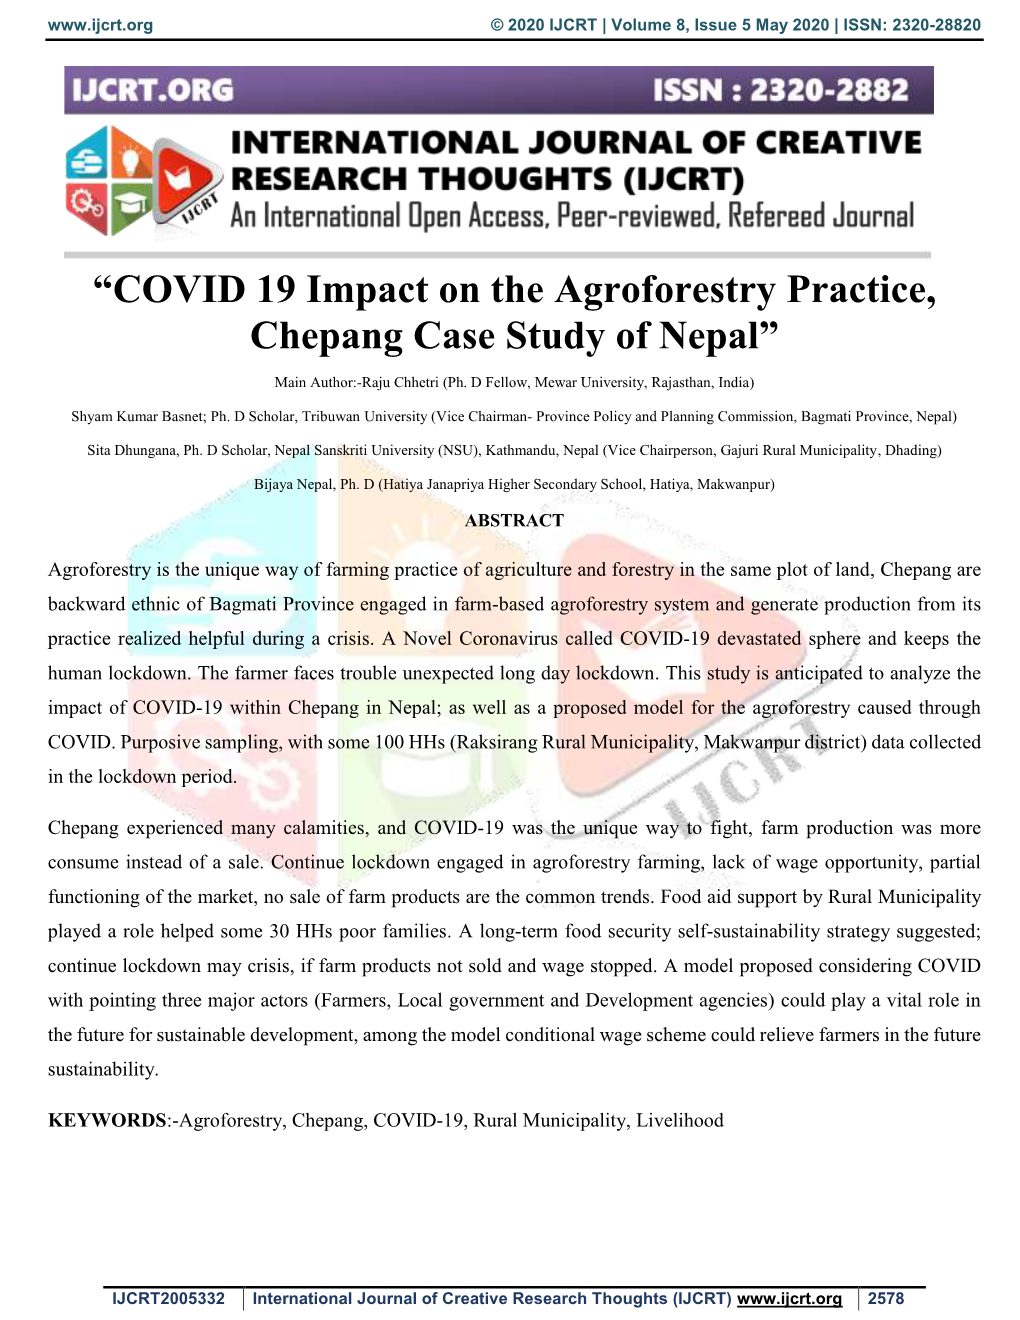 COVID 19 Impact on the Agroforestry Practice, Chepang Case Study of Nepal”